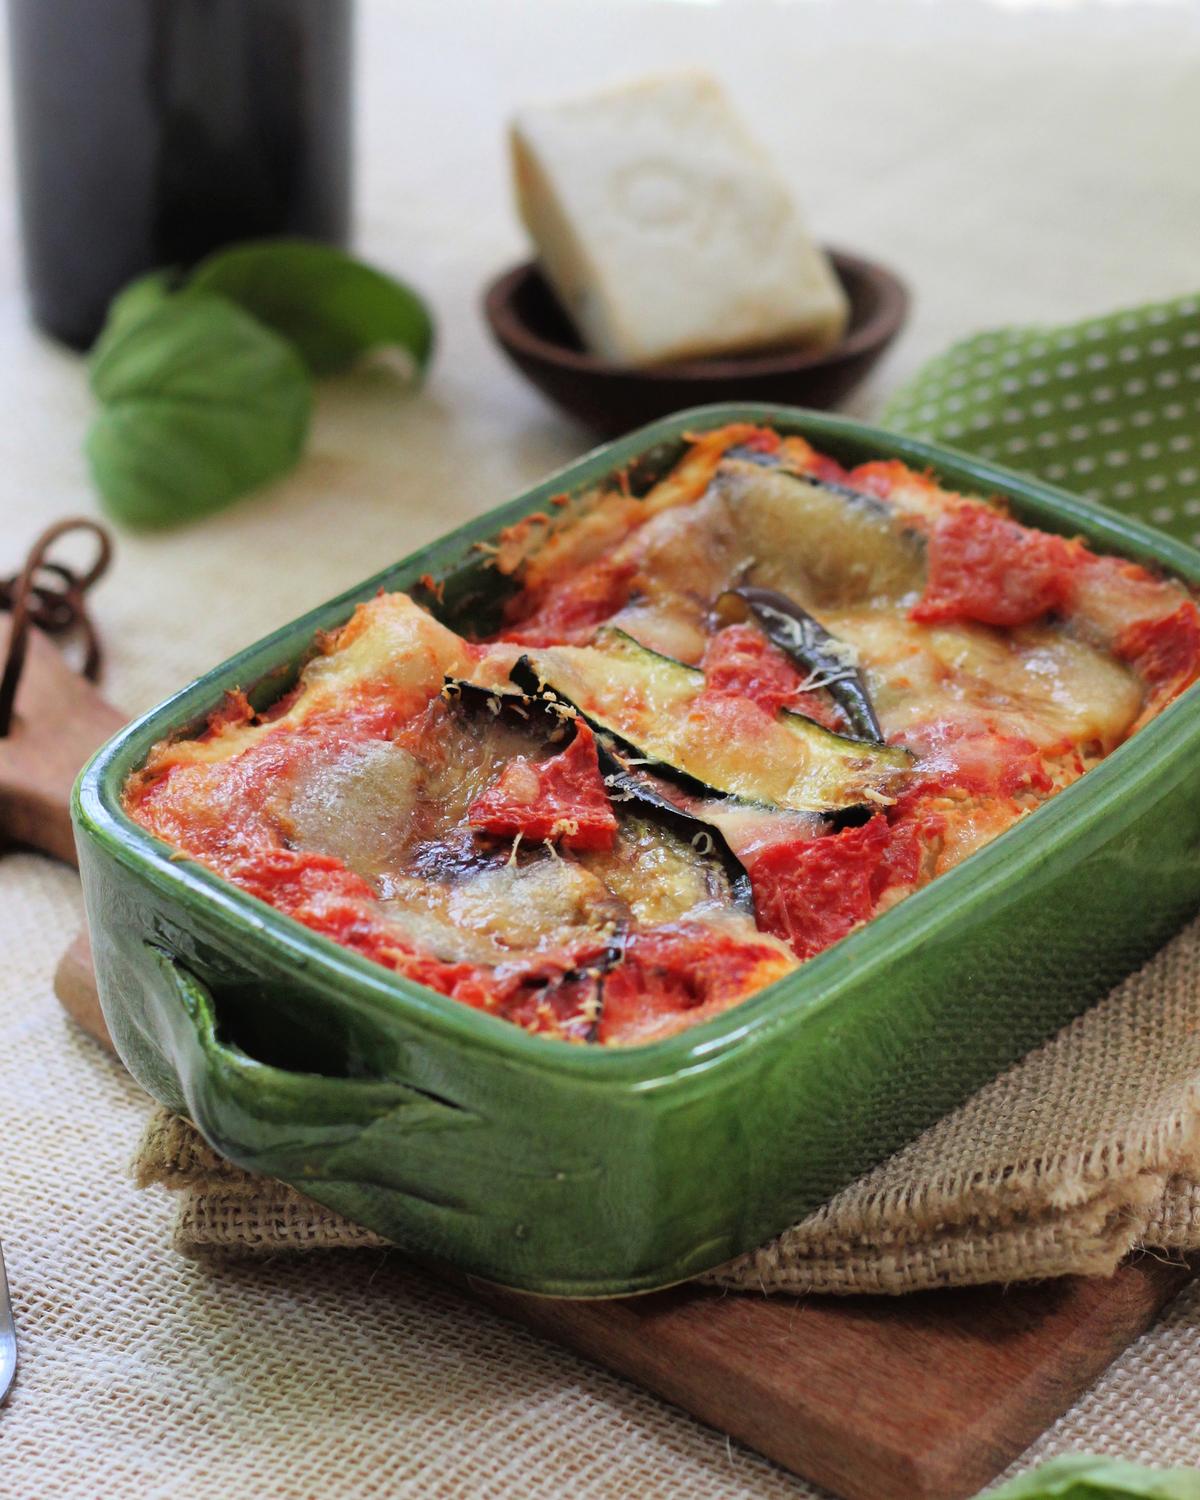 Tomato sauce, ricotta cheese, and a medley of eggplant, zucchini, and squash keeps this dish bright and vibrant. (Lynda Balslev for Tastefood)